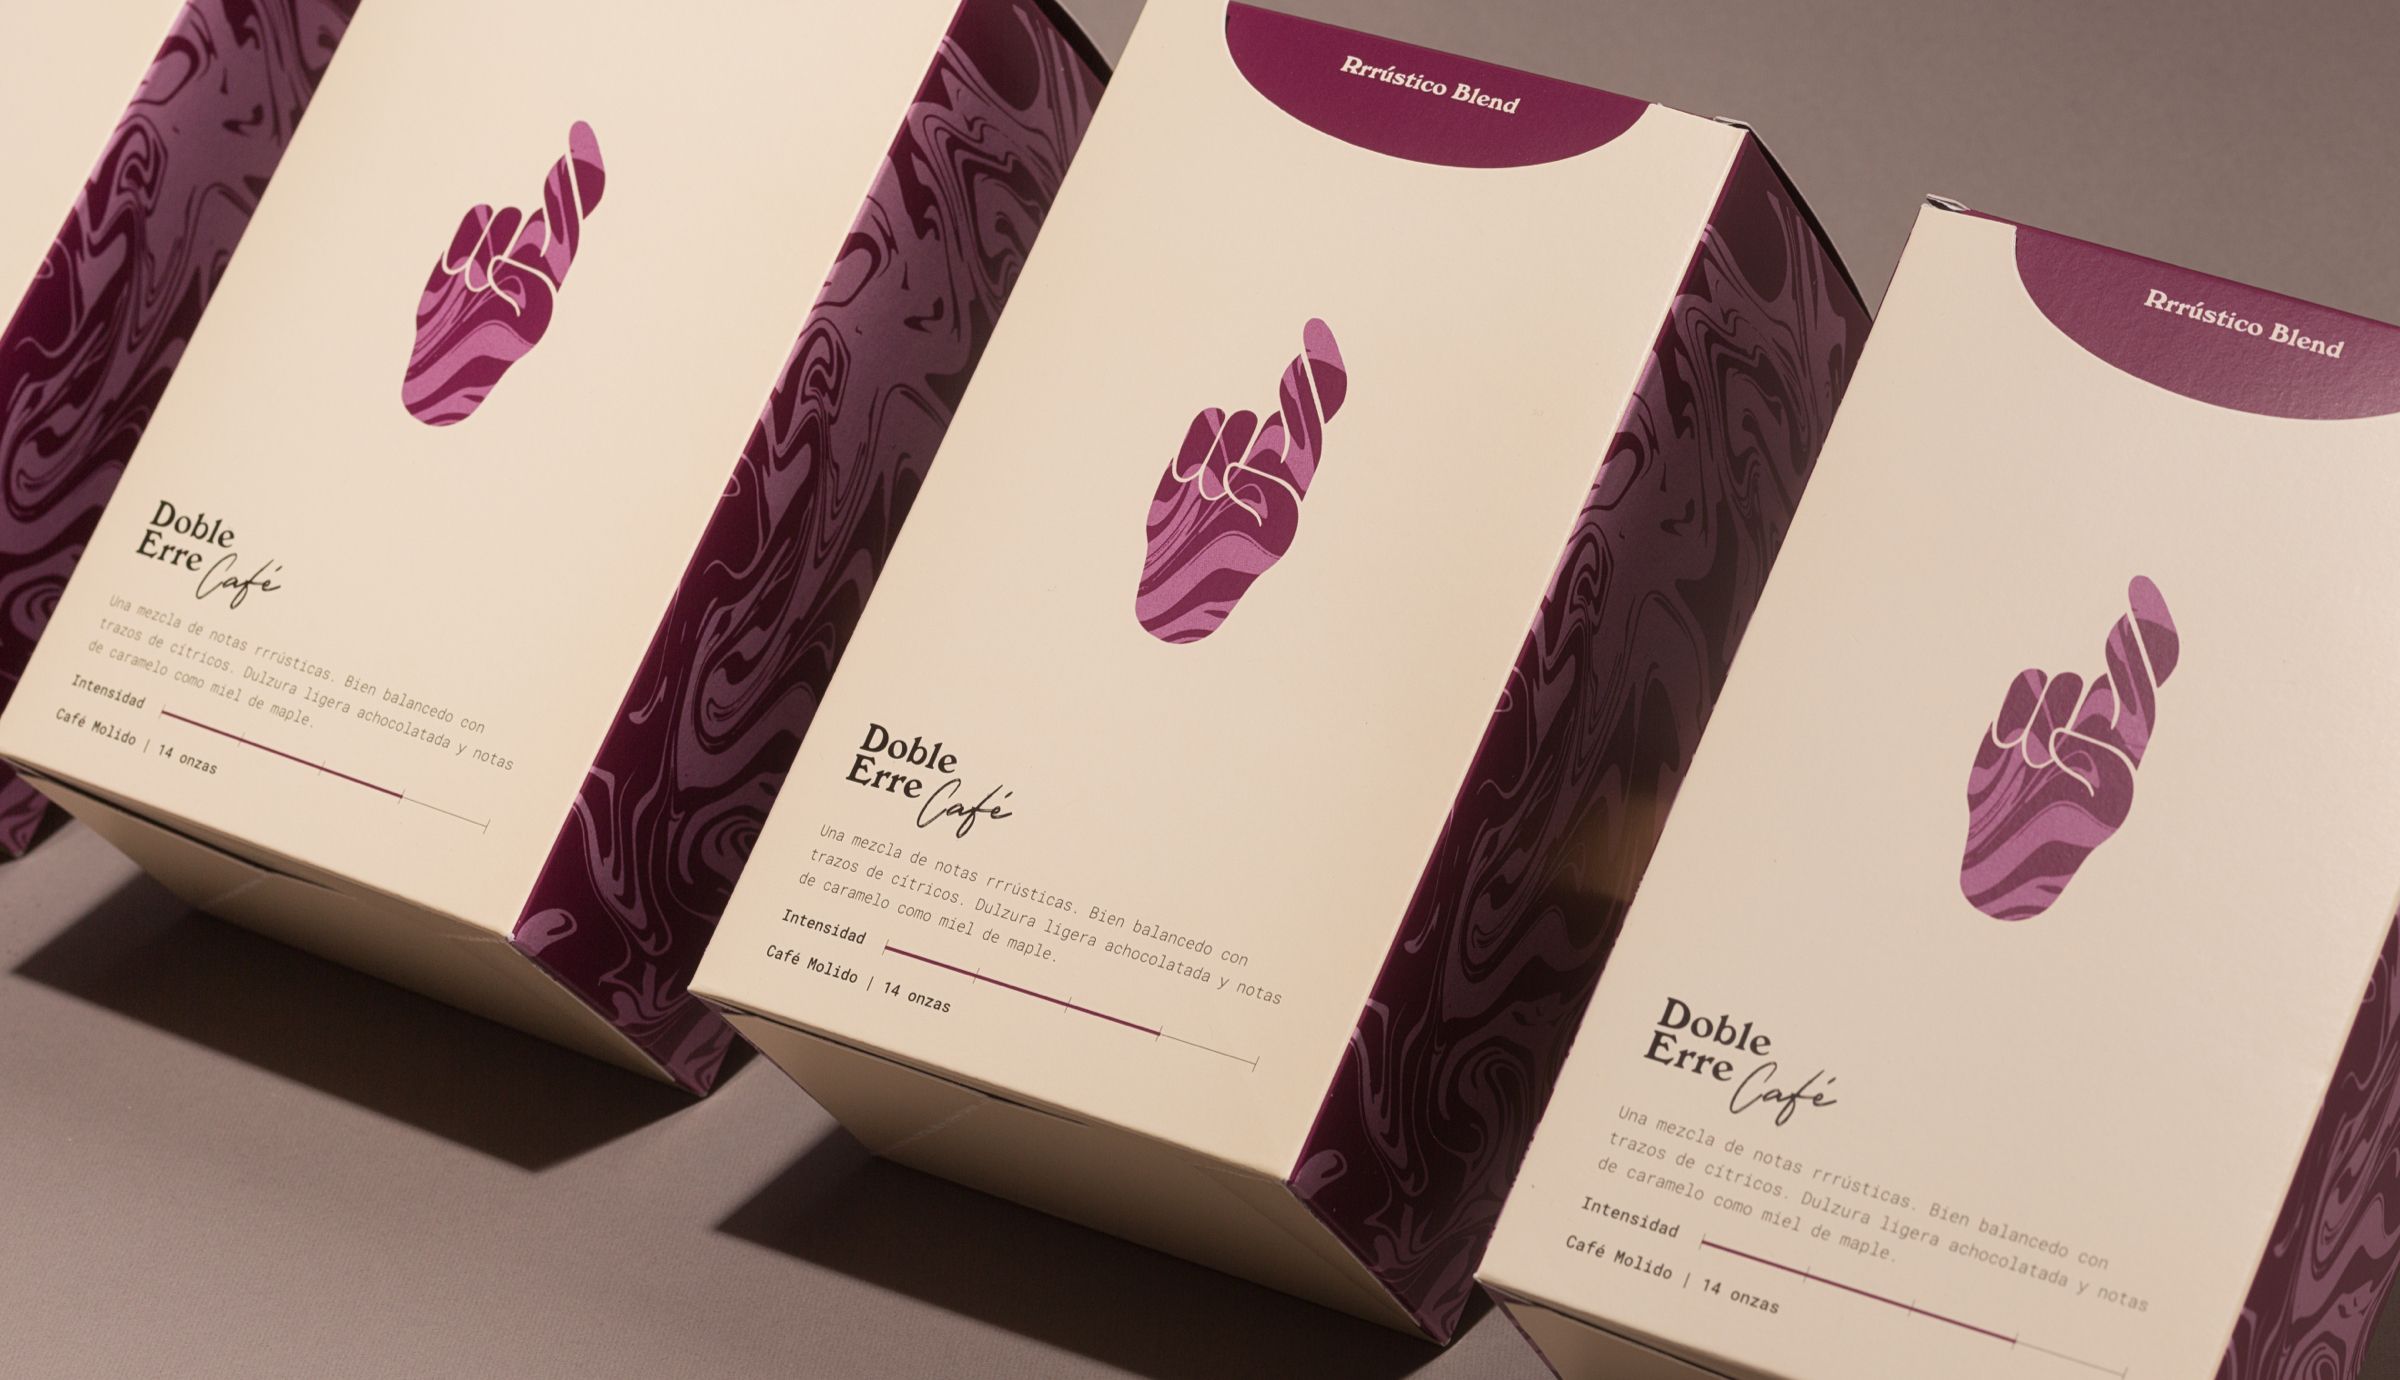 Packaging design for coffee